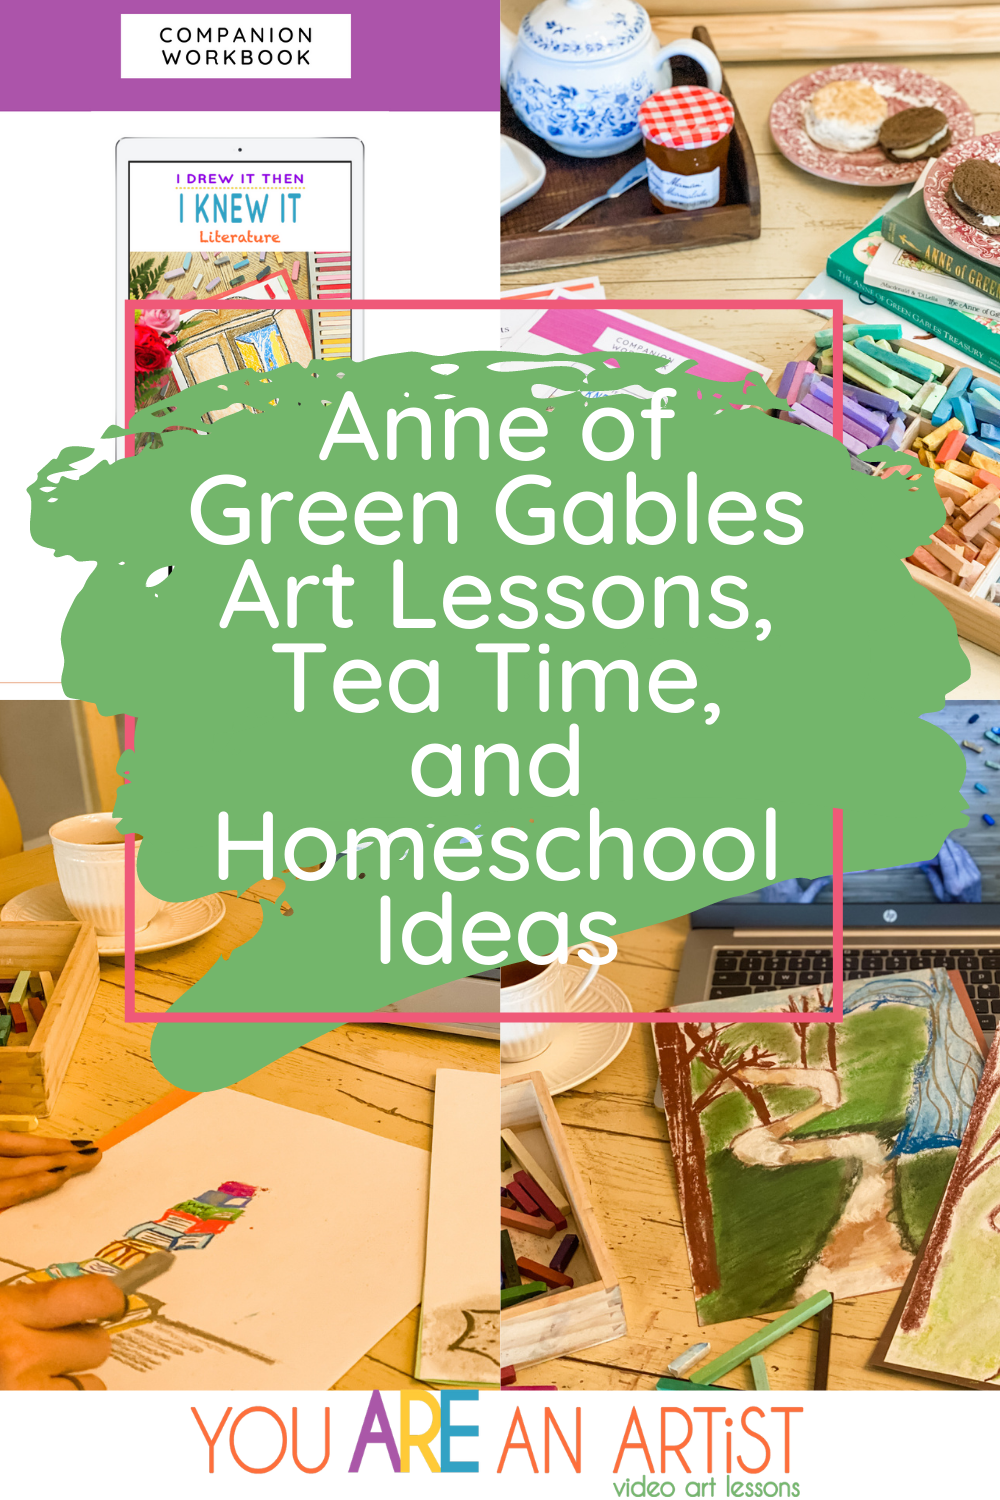 Calling all fellow Anne fans to celebrate Anne of Green Gables art lessons with tea time! Join us for homeschool art ideas and resources. #anneofgreengables #homeschoolart #onlineartlessons #artcurriculum #teatime